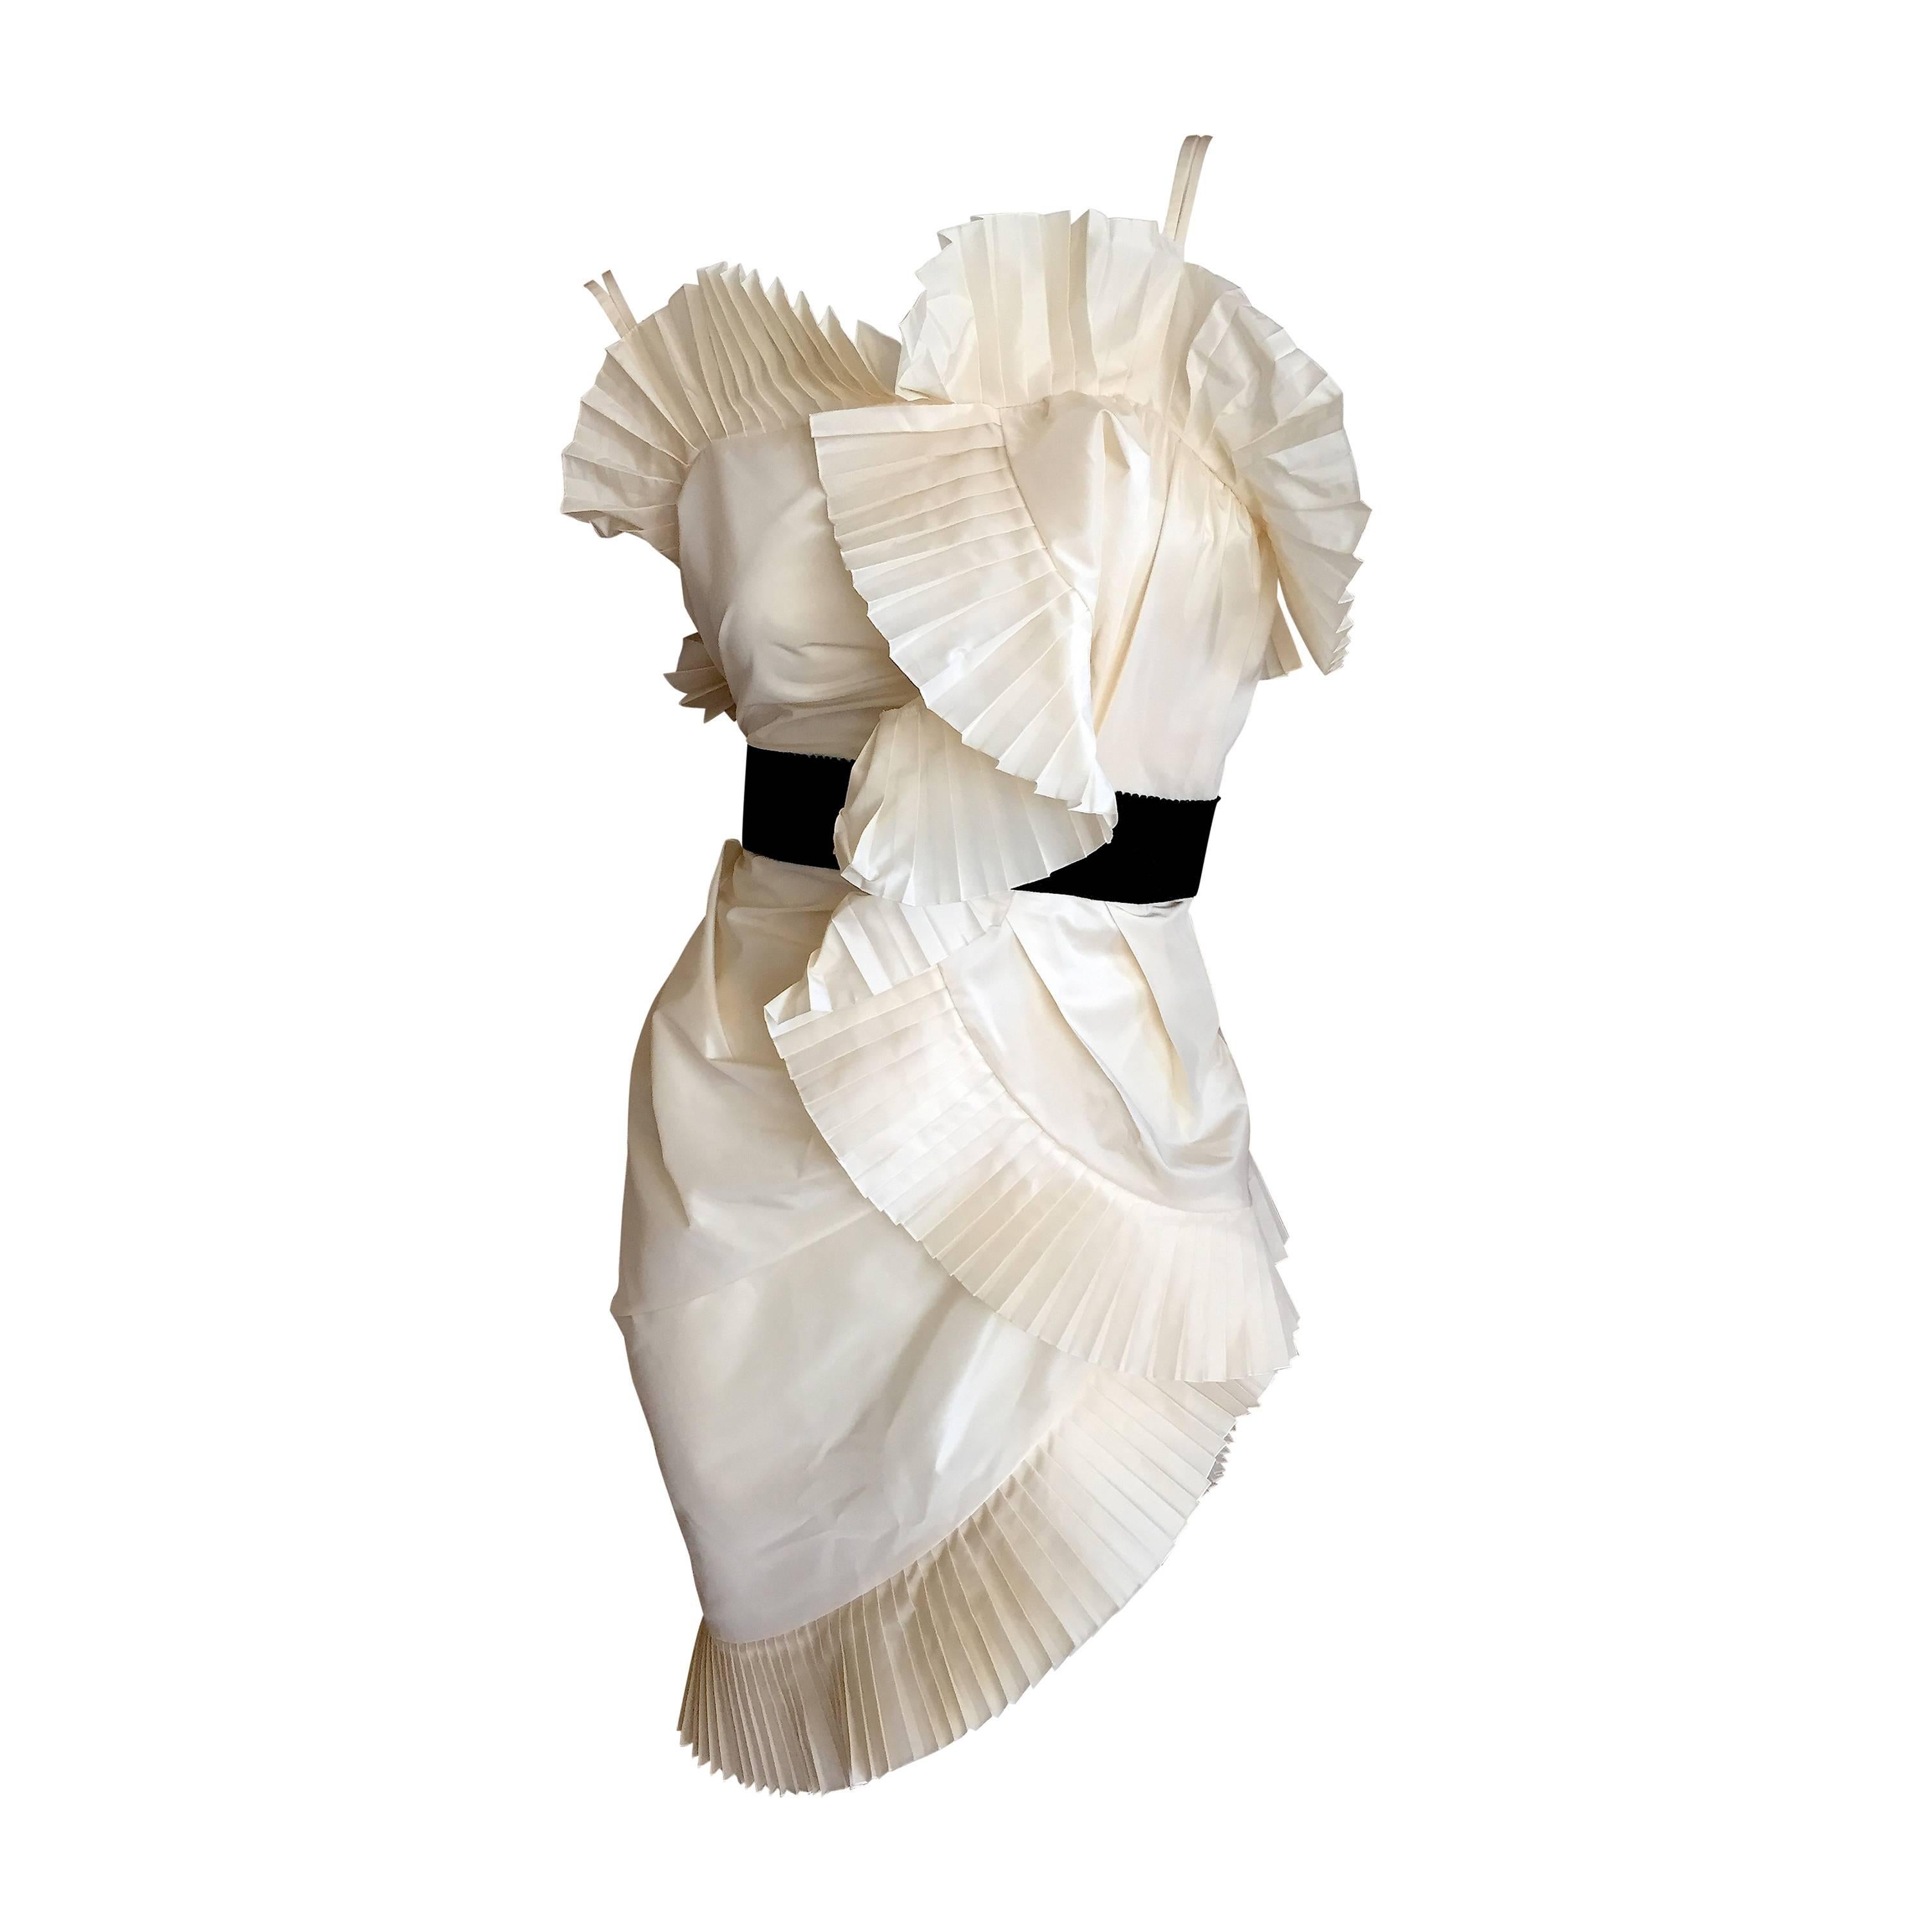 Christian Dior by Galliano Accordion Pleated Cocktail Mini Dress